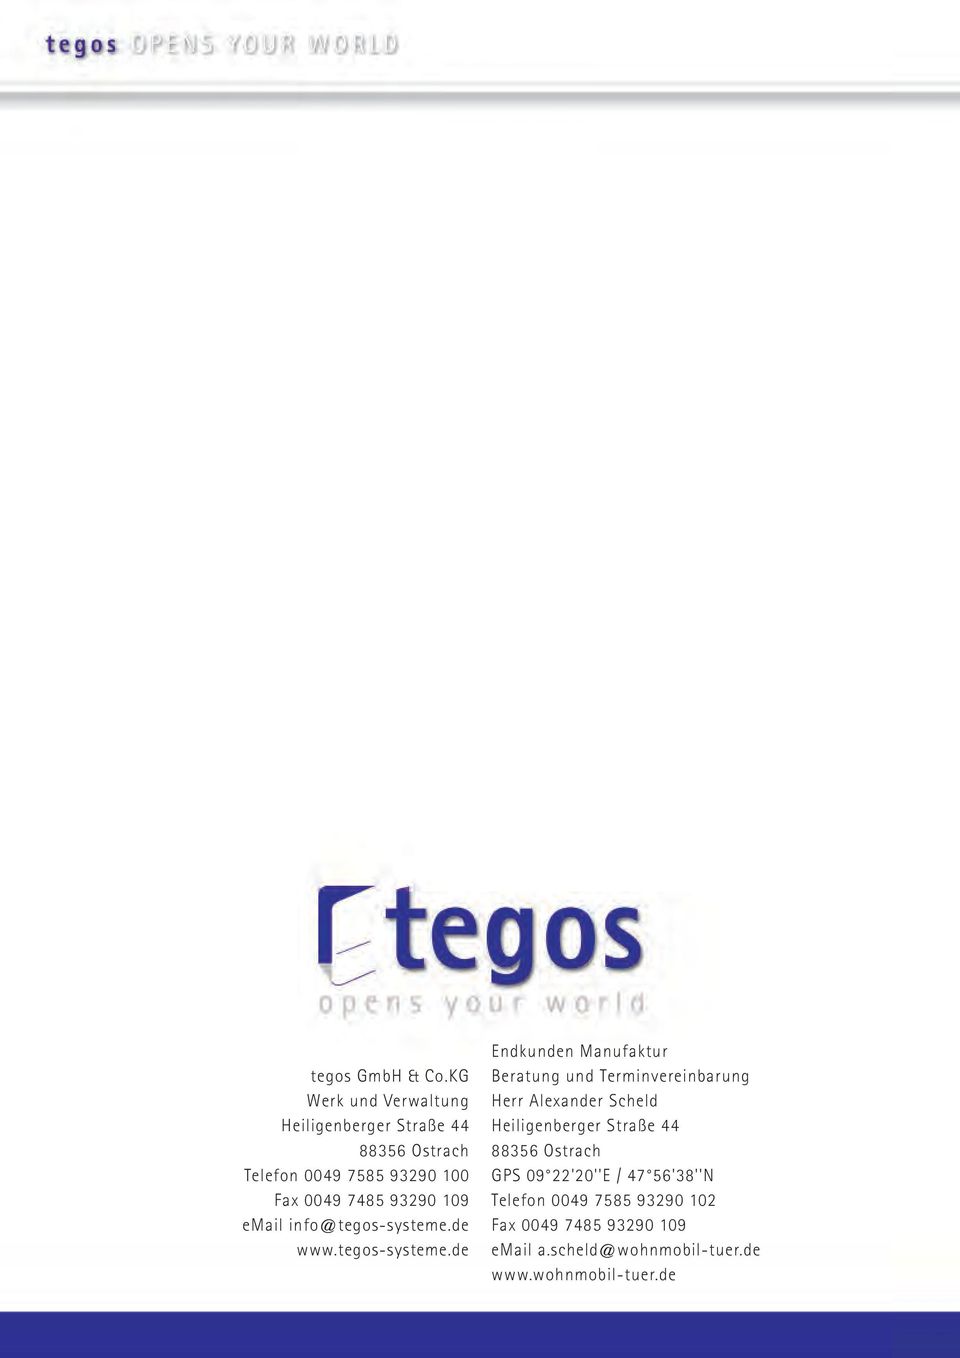 93290 109 email info@tegos-systeme.